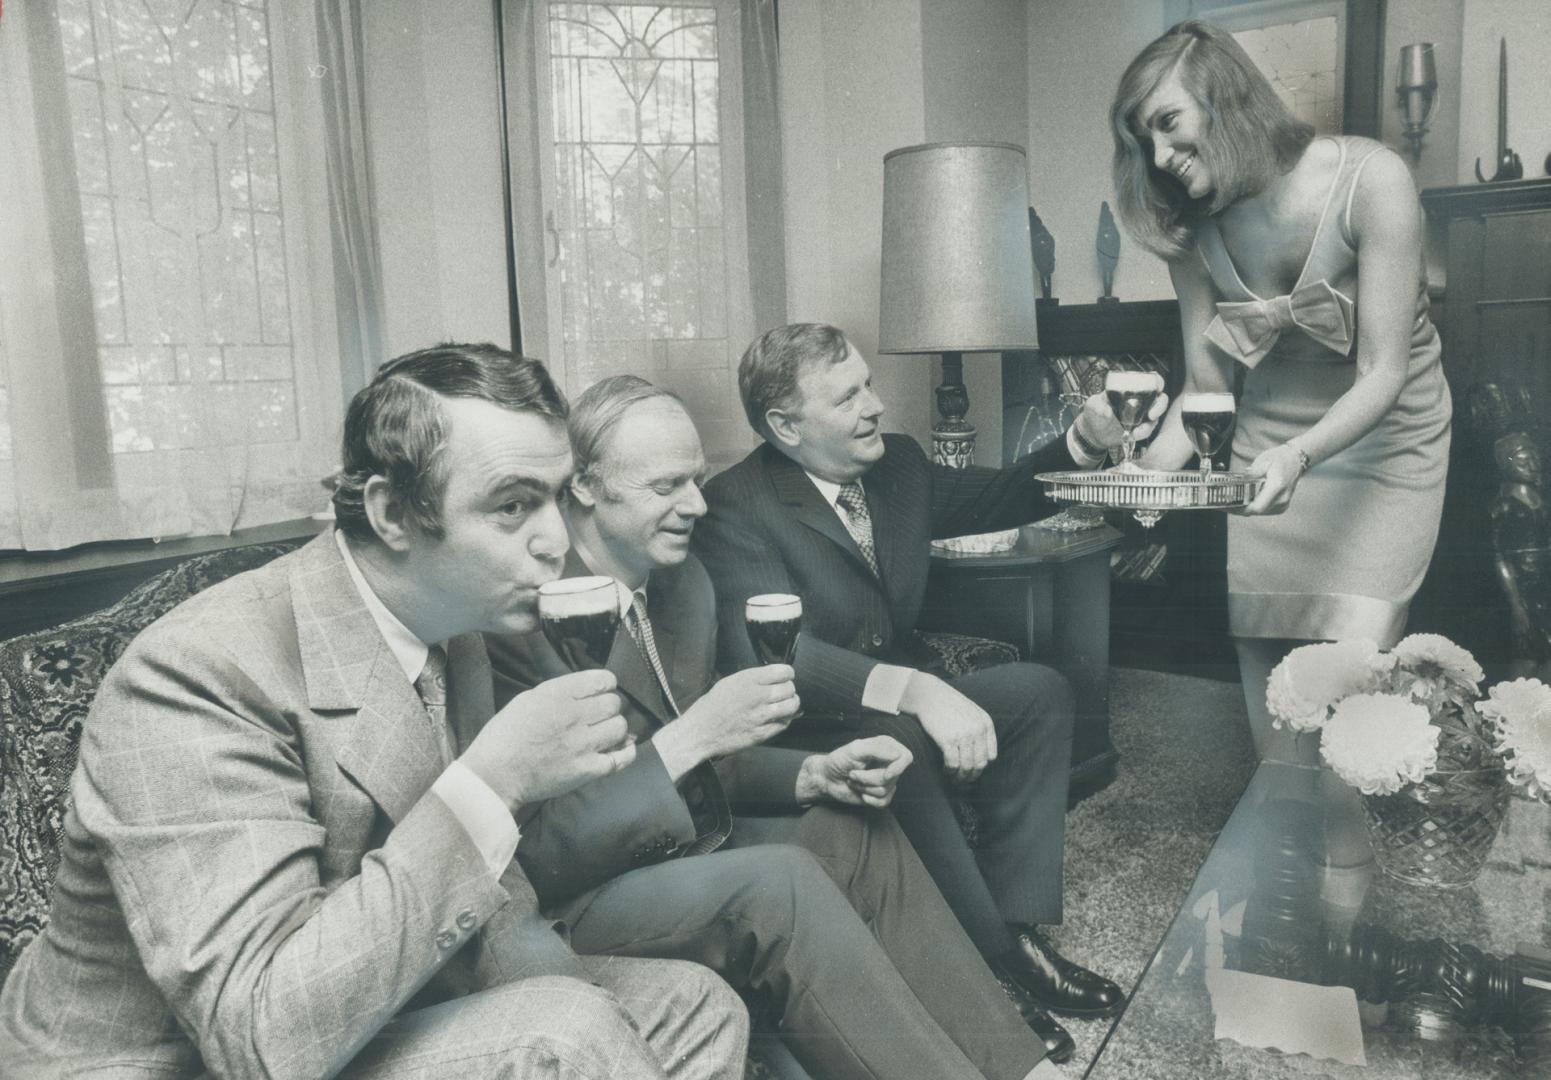 Irish coffee is great for sipping at the end of a Caravan tour, Above, Irishman Alderman Tony O'Donohue, left, enjoys Irish coffee with guests from Ir(...)